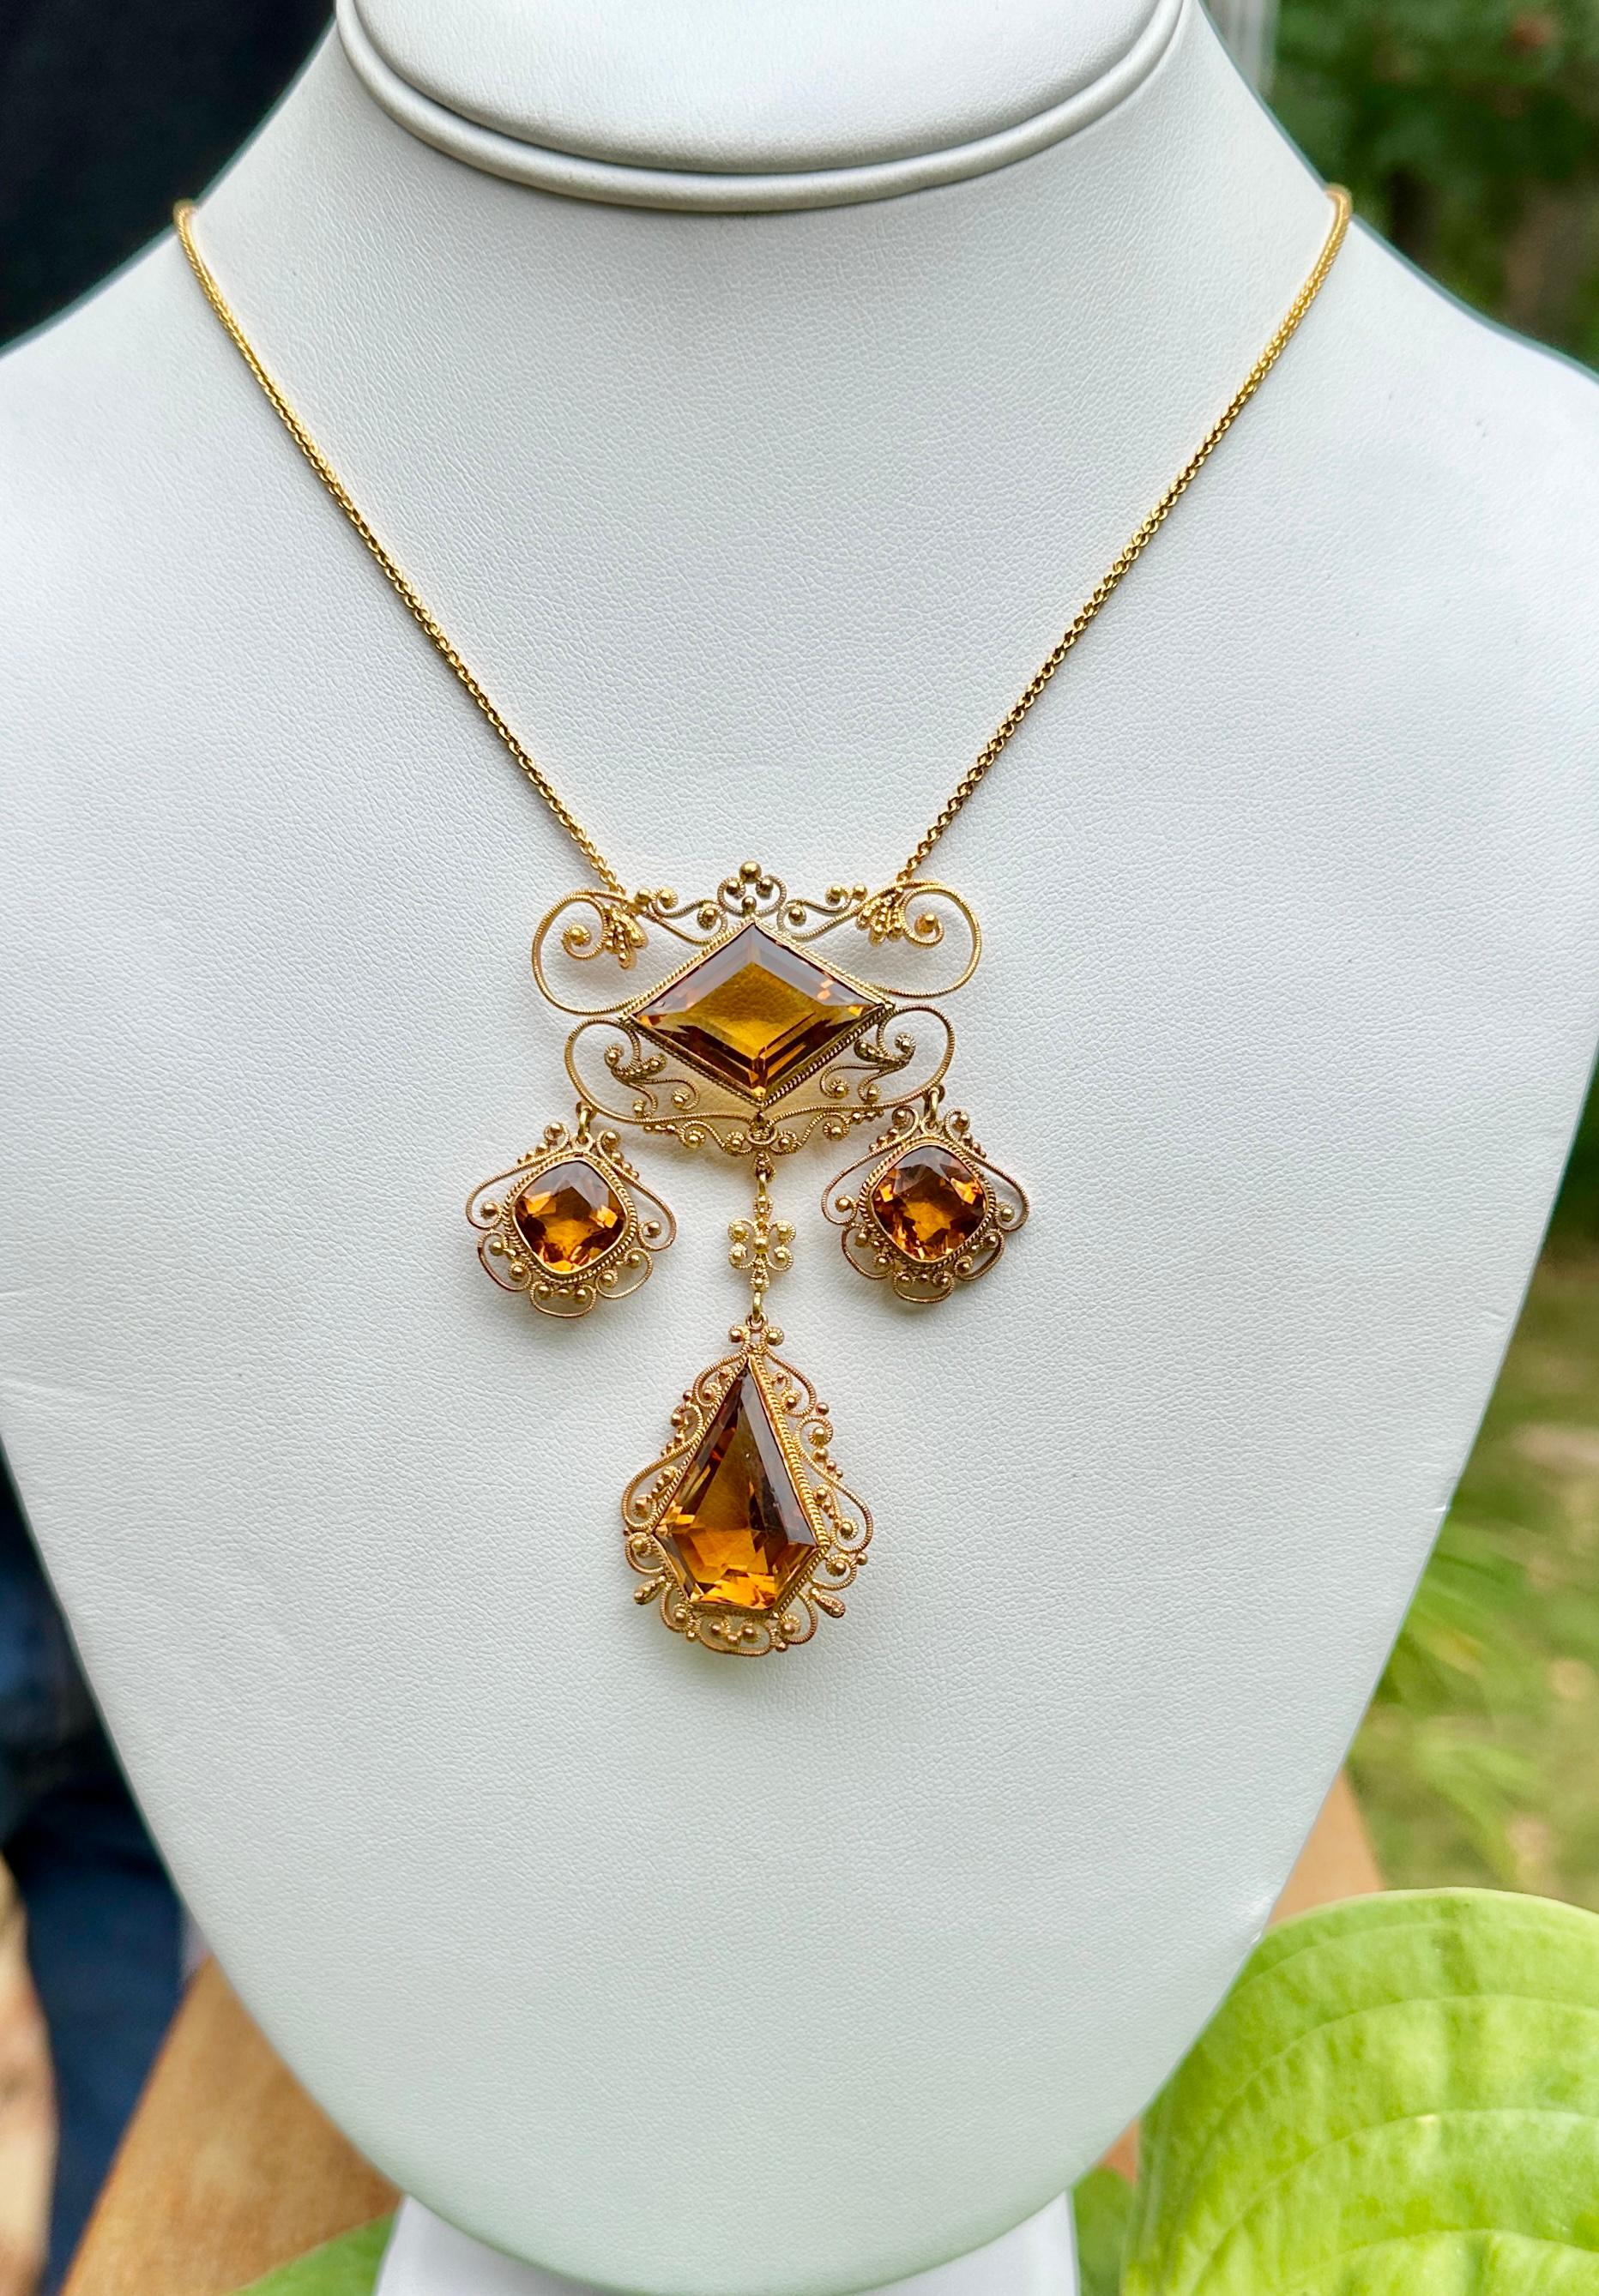 We are so delighted to offer this gorgeous Belle Epoque - Victorian Citrine Pendant Necklace in 14 Karat Yellow Gold.  The magnificent antique necklace features four faceted natural Citrine gems of beautiful color and absolutely exquisite cut.  The